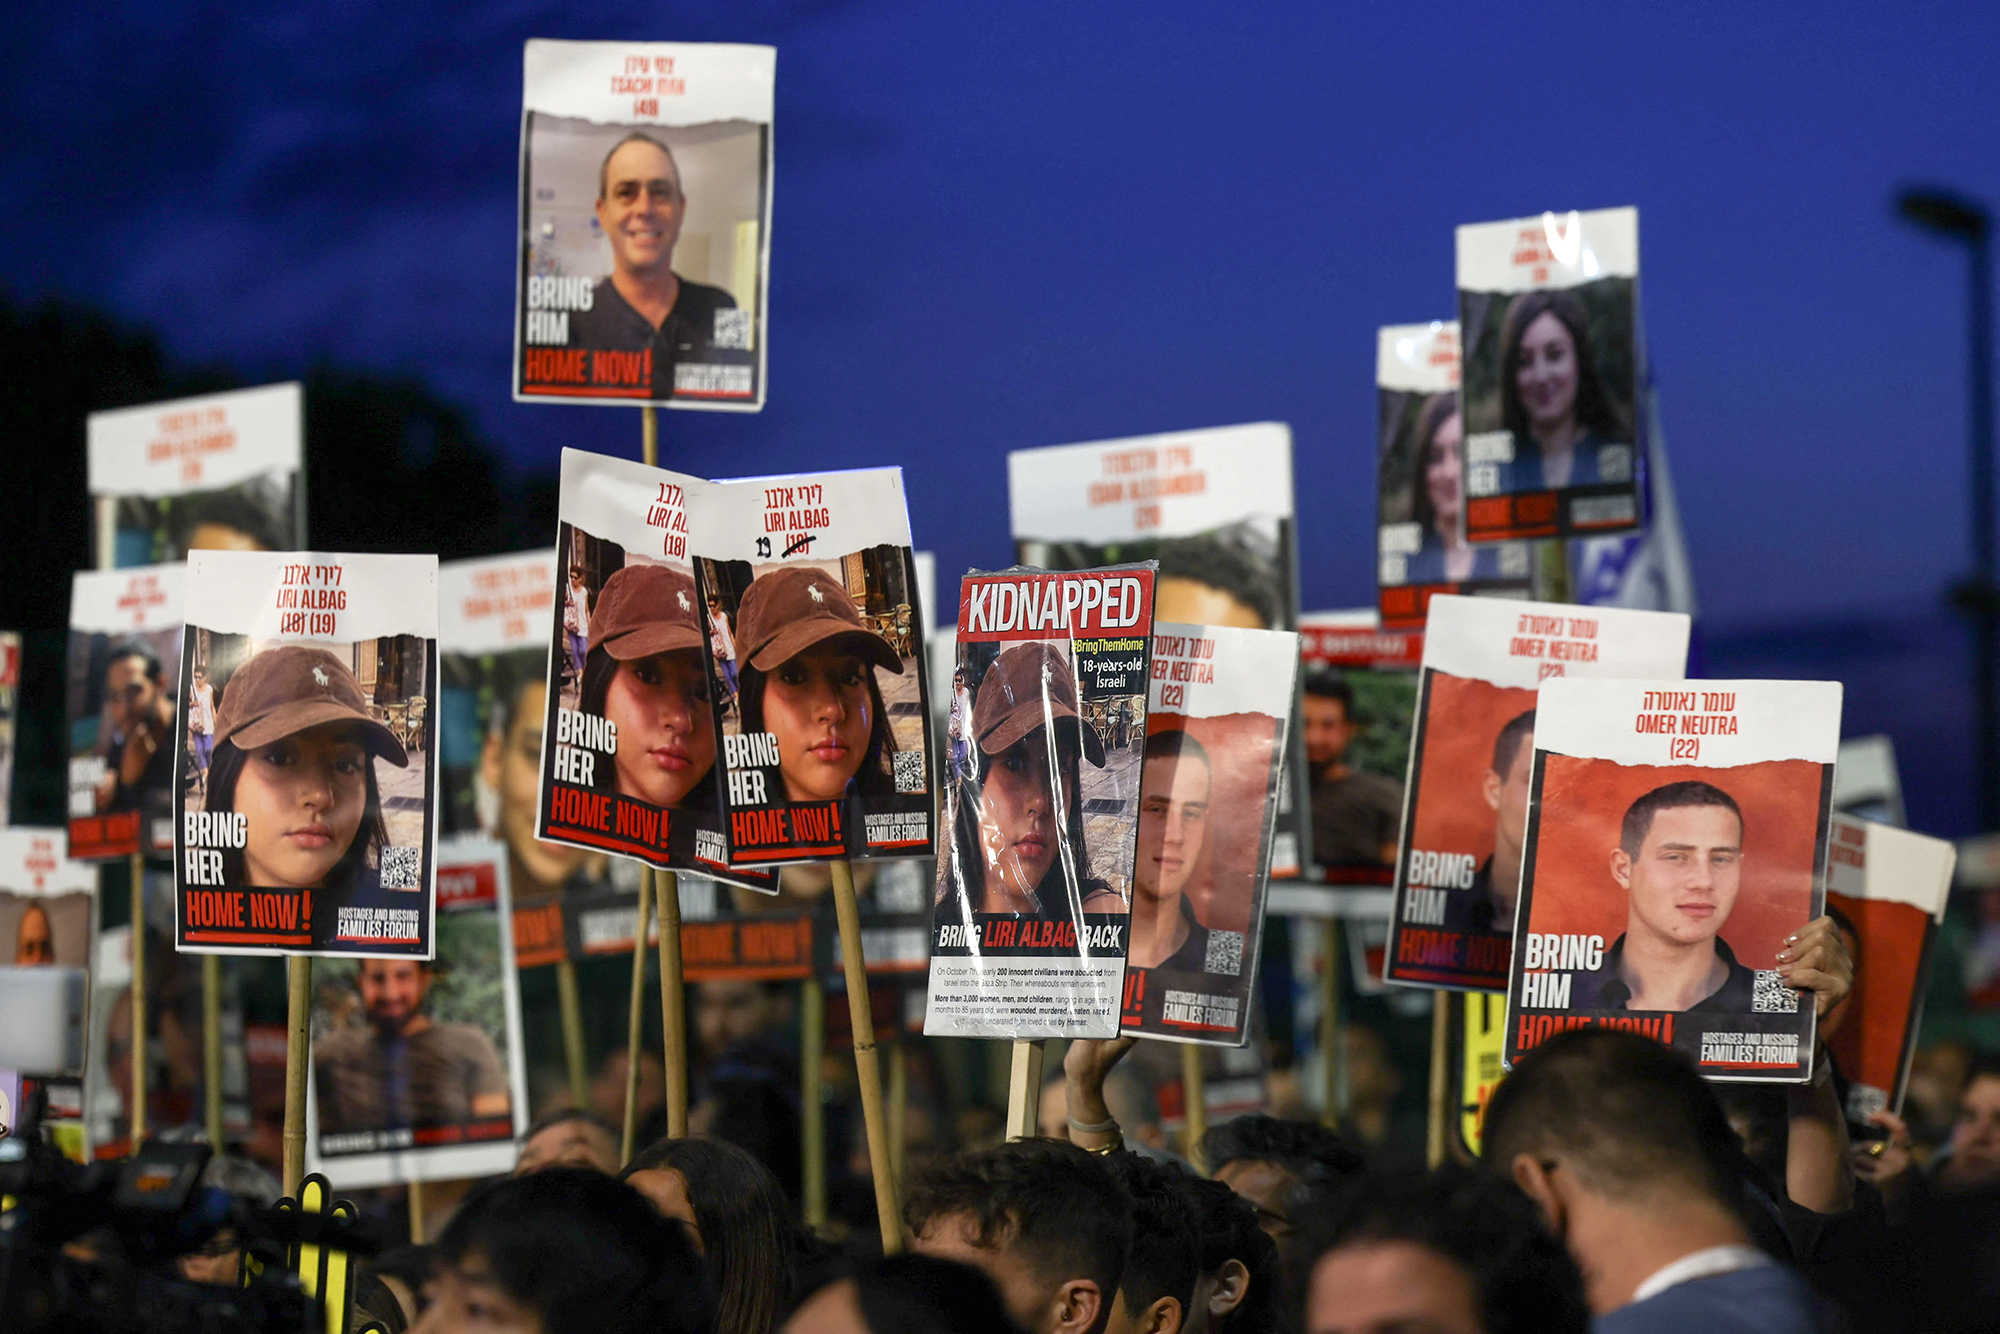 People carry pictures of the hostages during a rally for their immediate release near the Knesset, Israel's parliament in Jerusalem, on April 7.